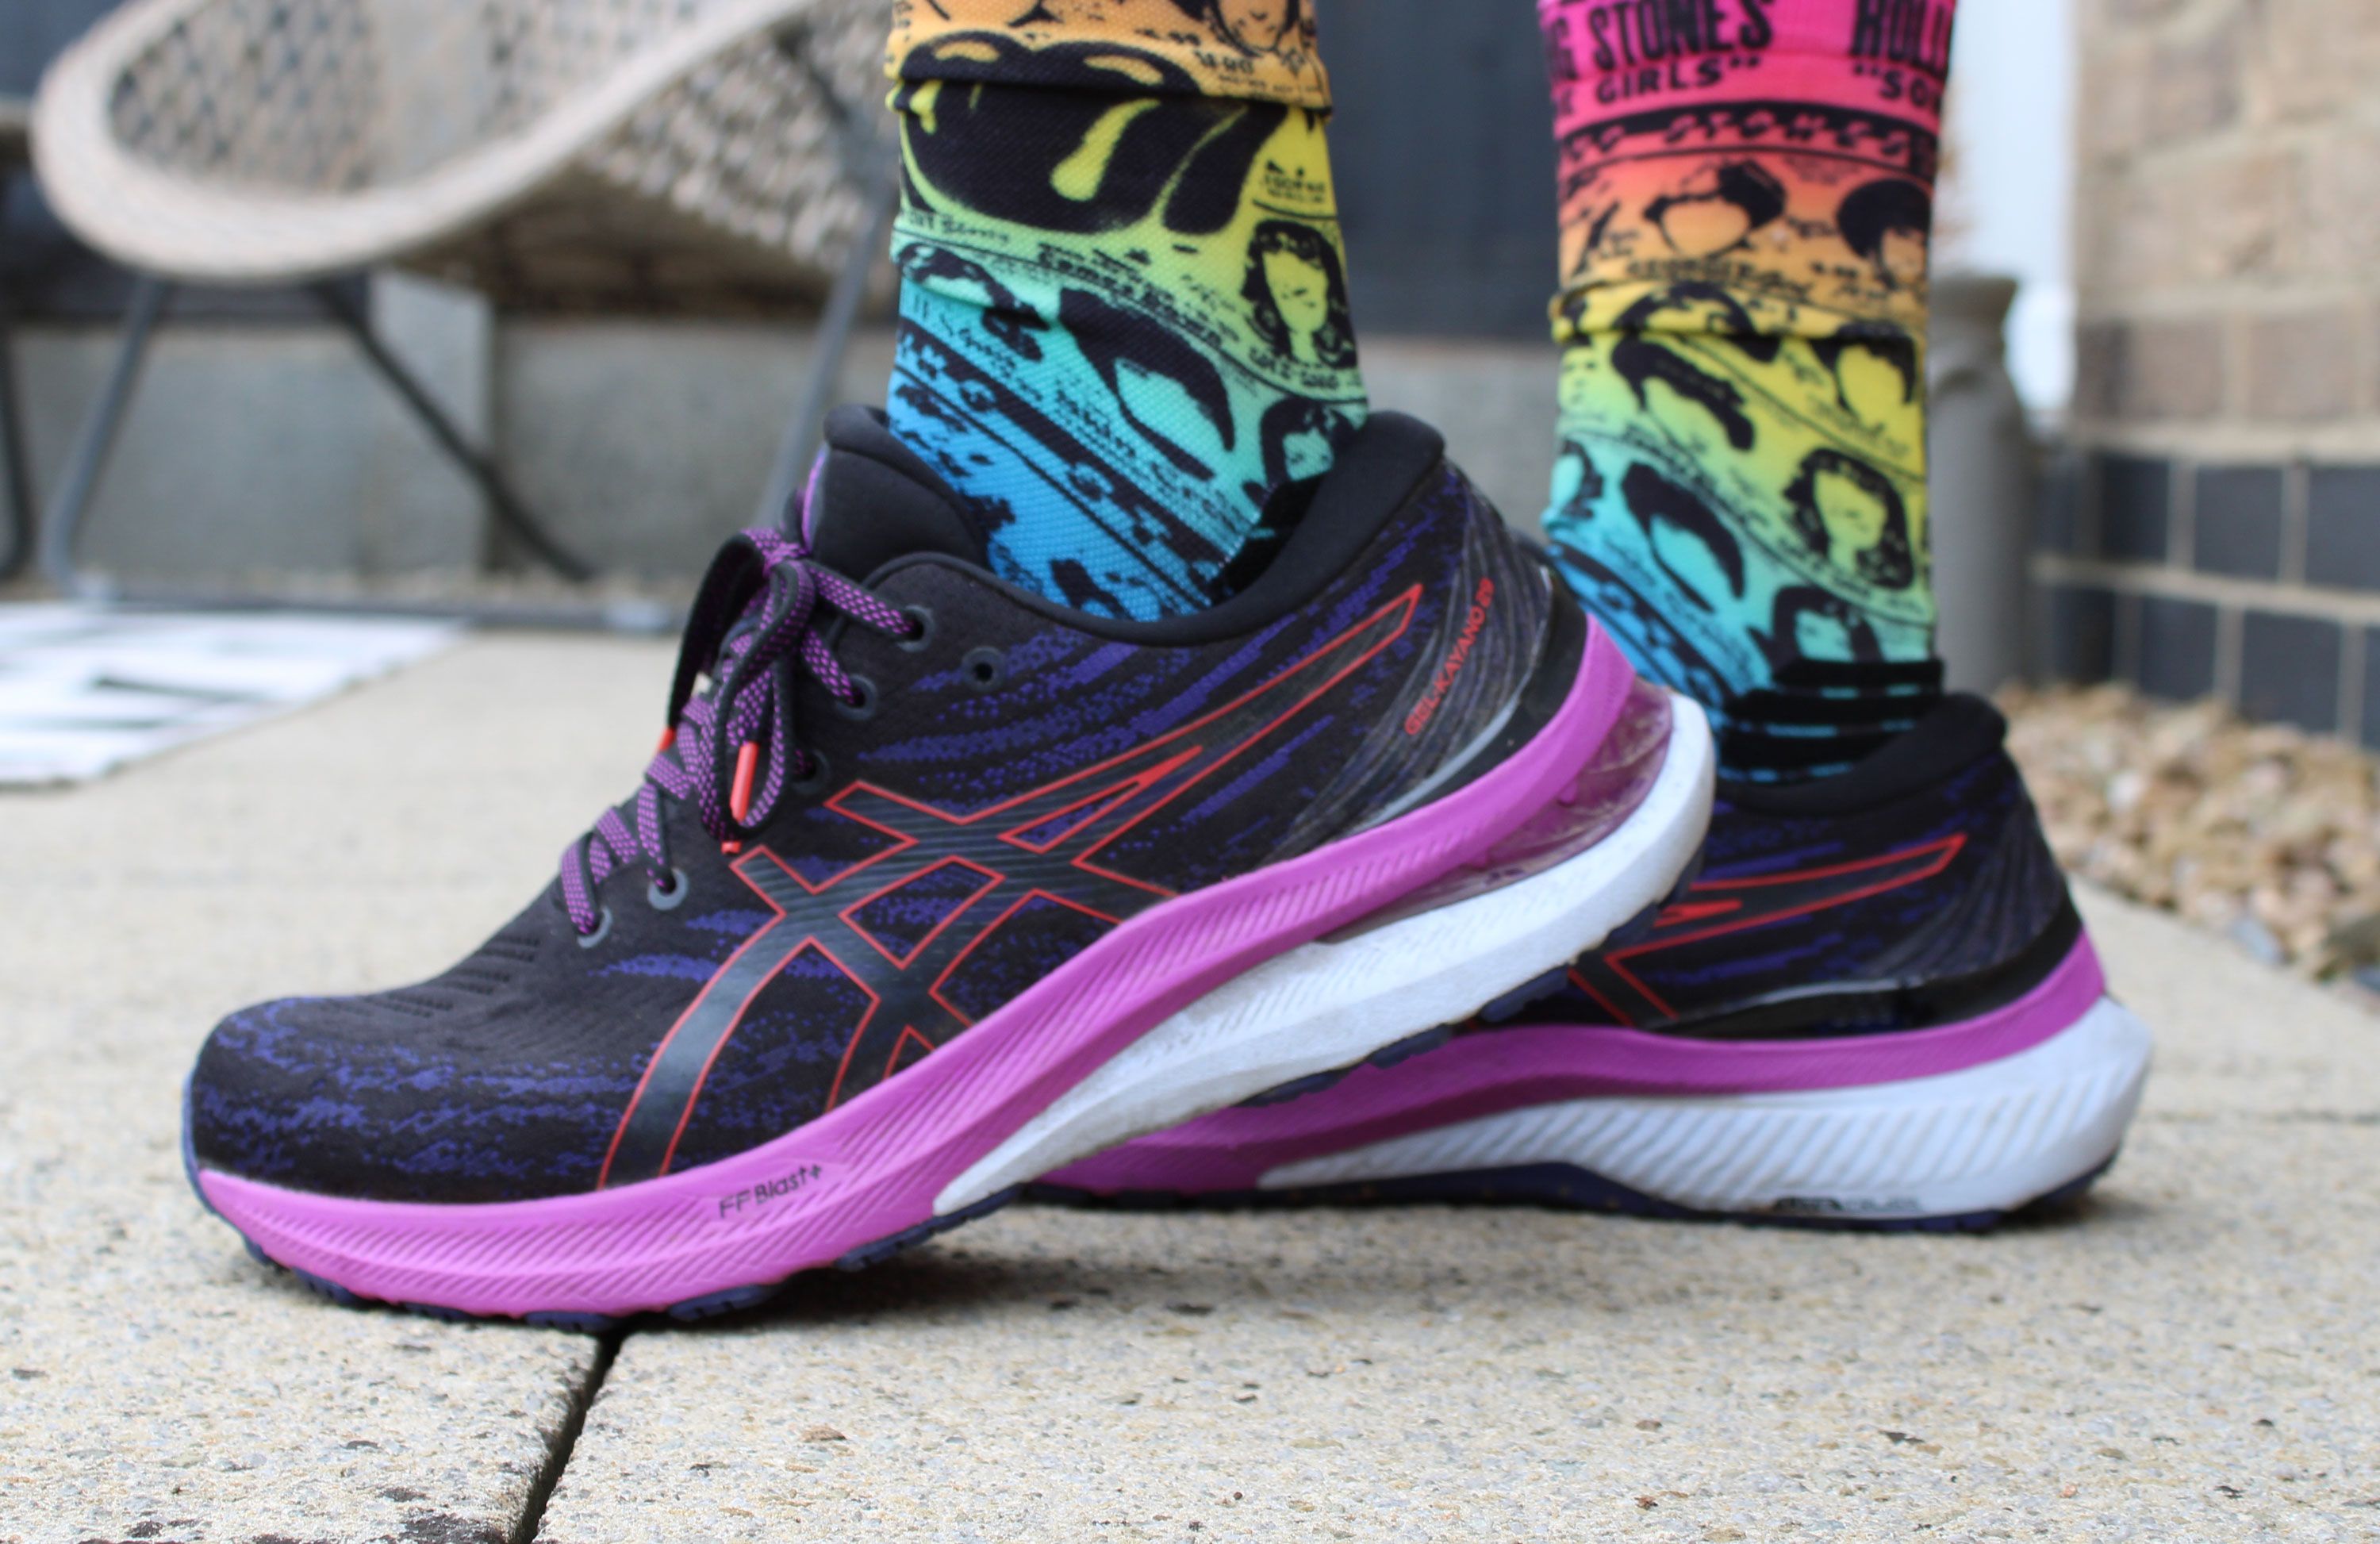 ASICS FrontRunner - Looking for a road shoe to you further? Try the Gel Kayano-29